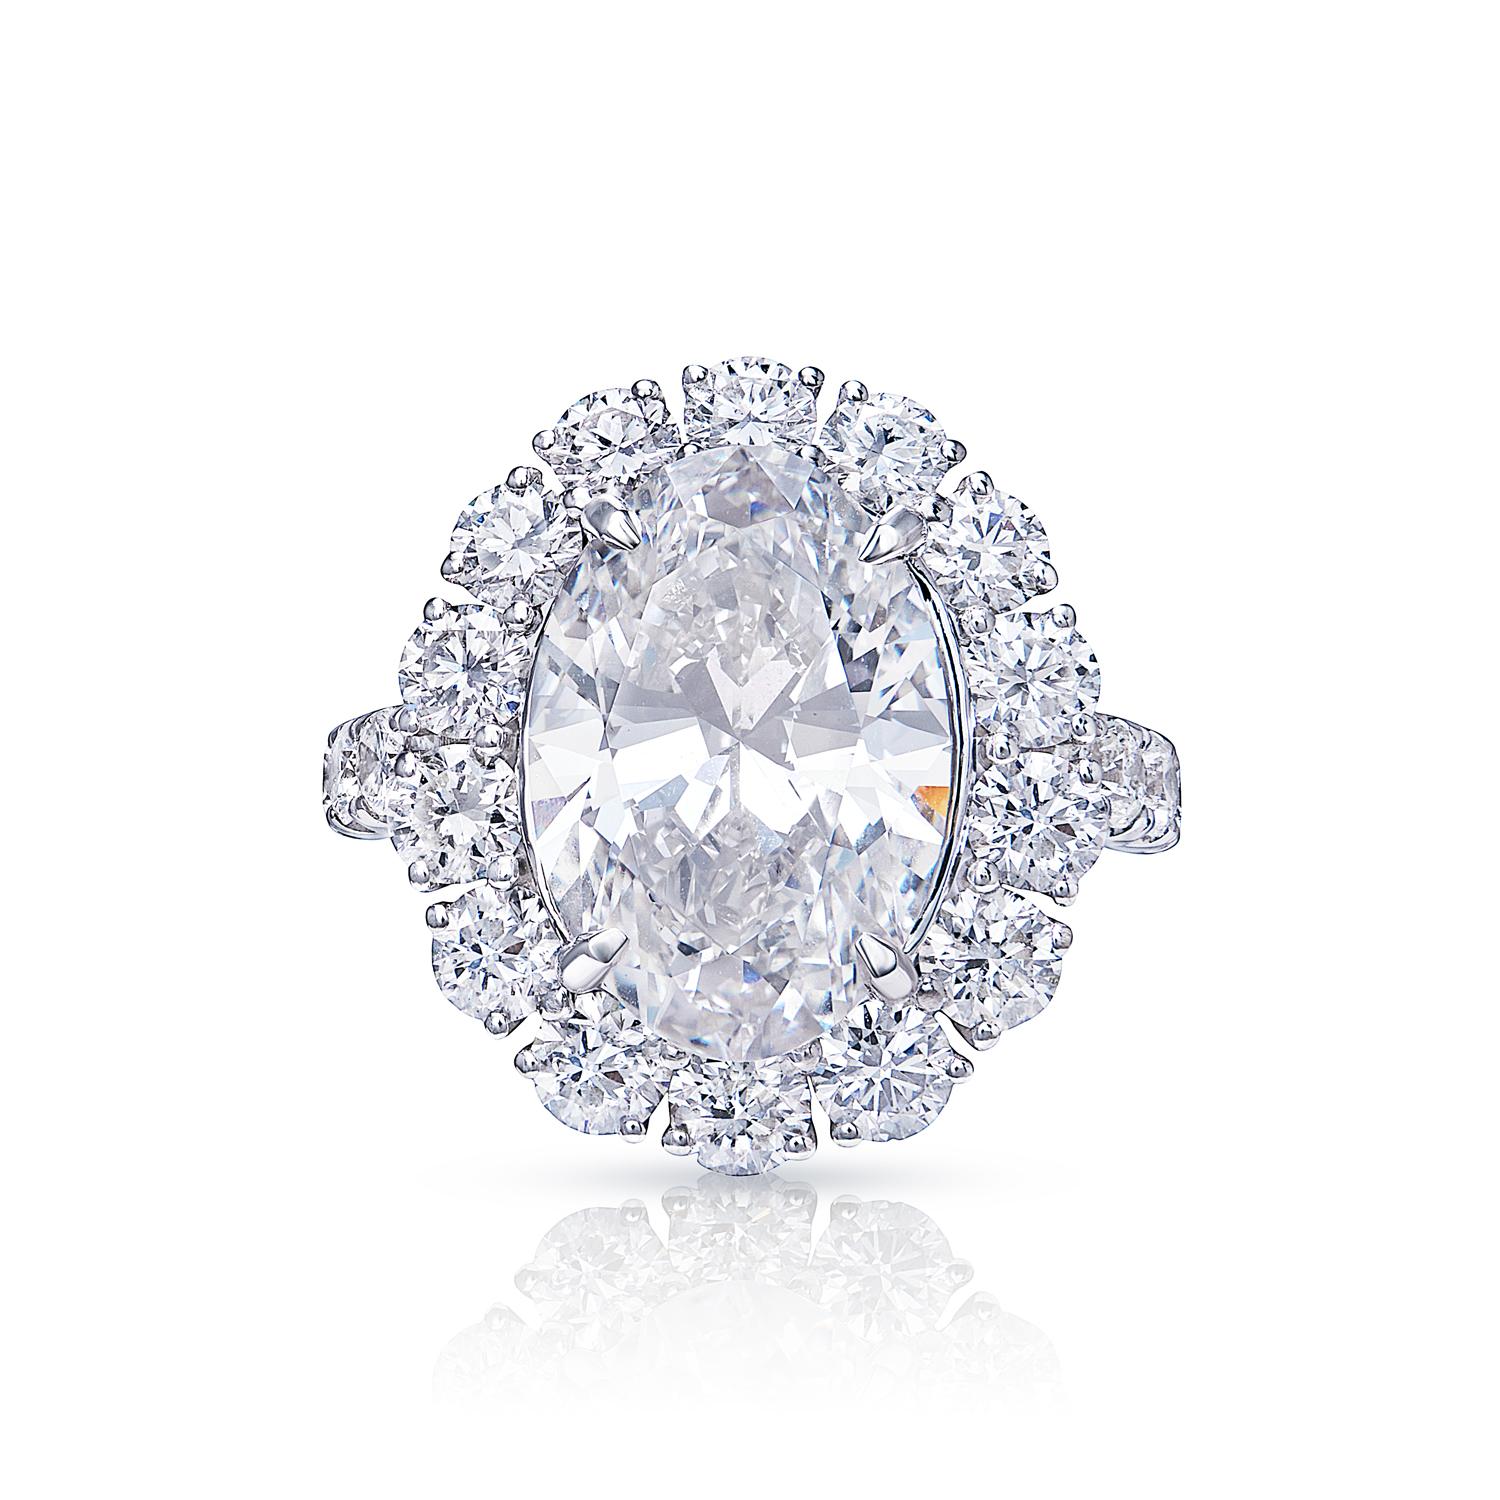 This stunning piece of jewelry features a beautiful oval-cut diamond that is sure to take your breath away. The oval-cut diamond is set in a platinum setting and is accented by two smaller diamonds on either side. The ring also has a split shank